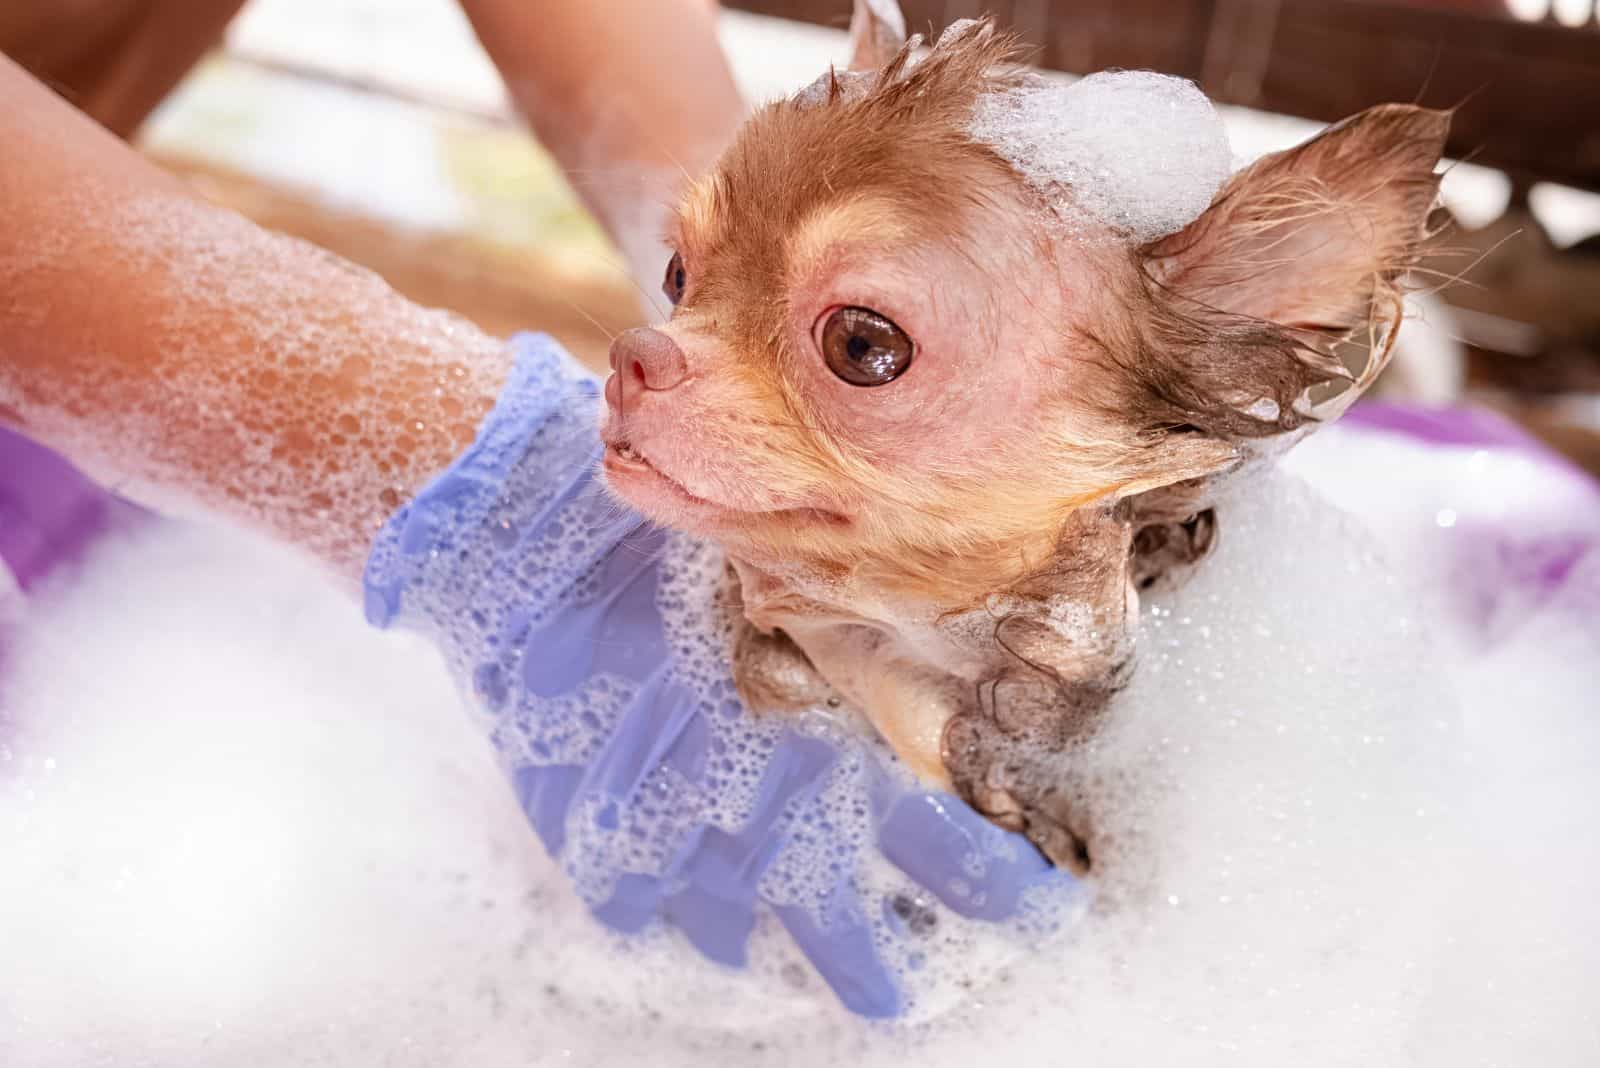 a woman with gloves bathes a dog